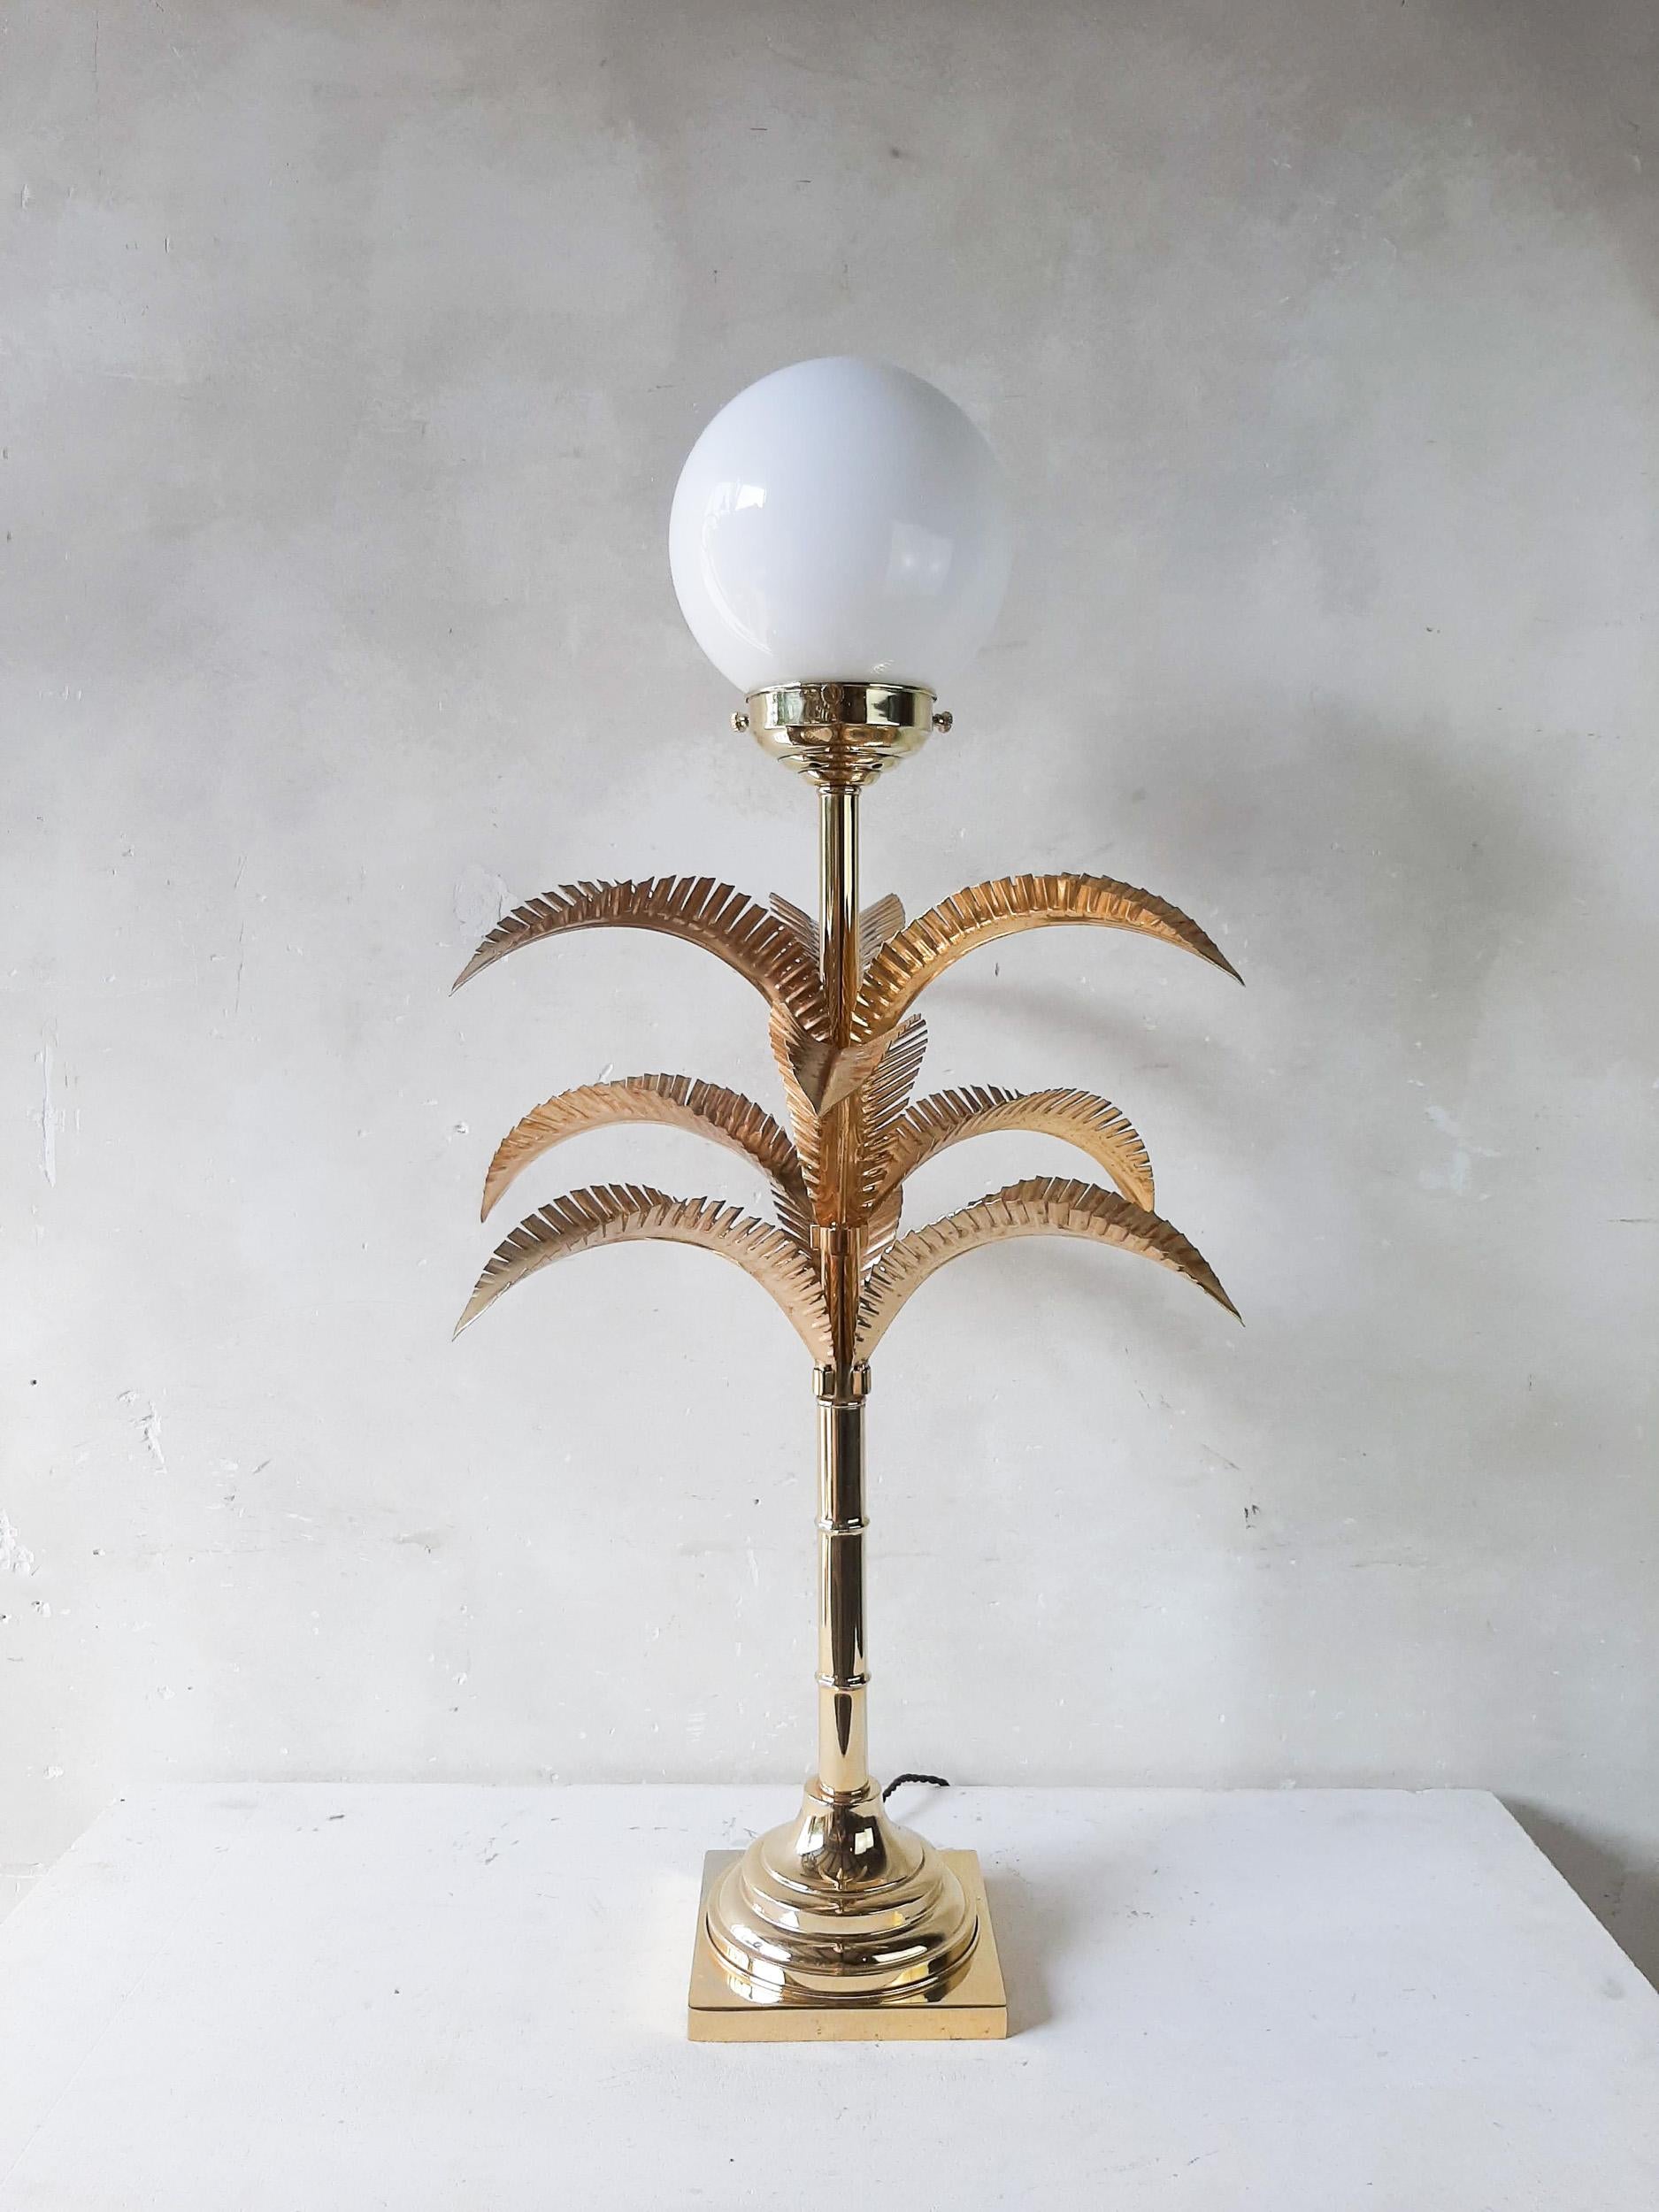 Beautiful palm tree lamp attributed to Sergio Terzani 1970s Florence, Italy.
Made of metal with a brass finish that shows a beautiful original distressed patina. With a lamp bulb made of opaline glass.
Decorative vintage lamp in Hollywood Regency